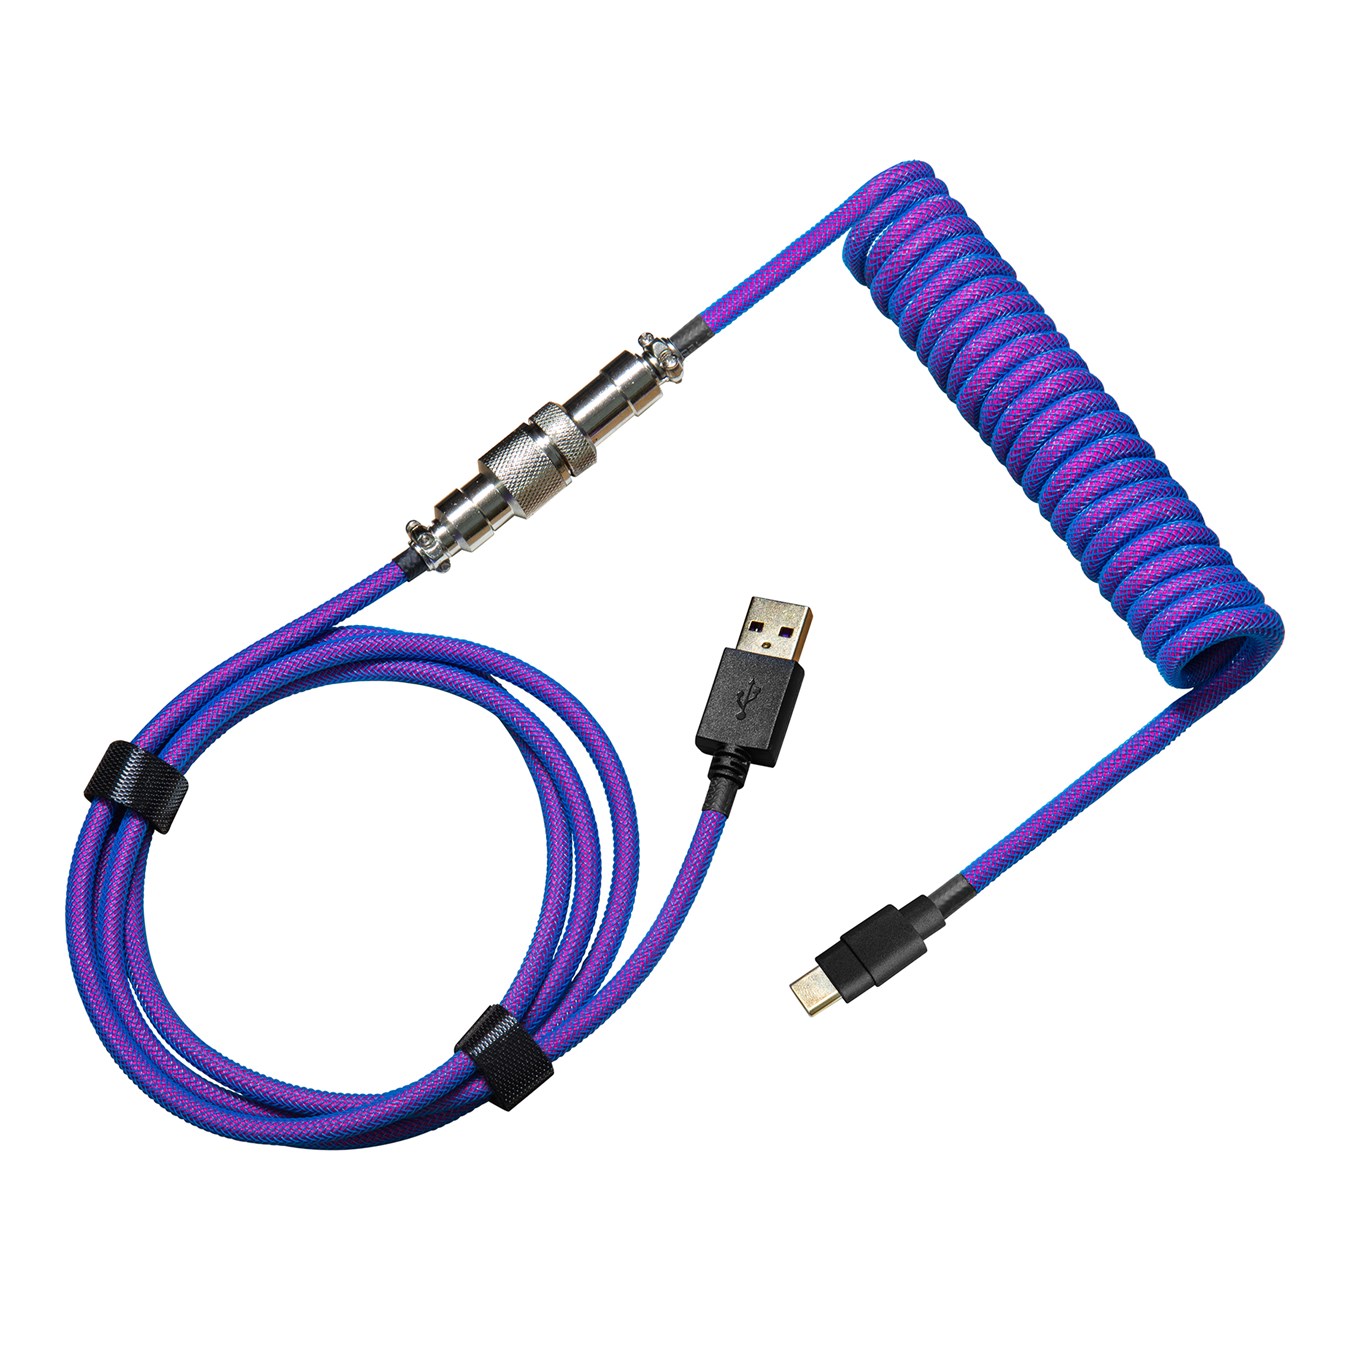 Coiled Keyboard Cable - Blue Purple - USB Type-A to USB Type-C connector